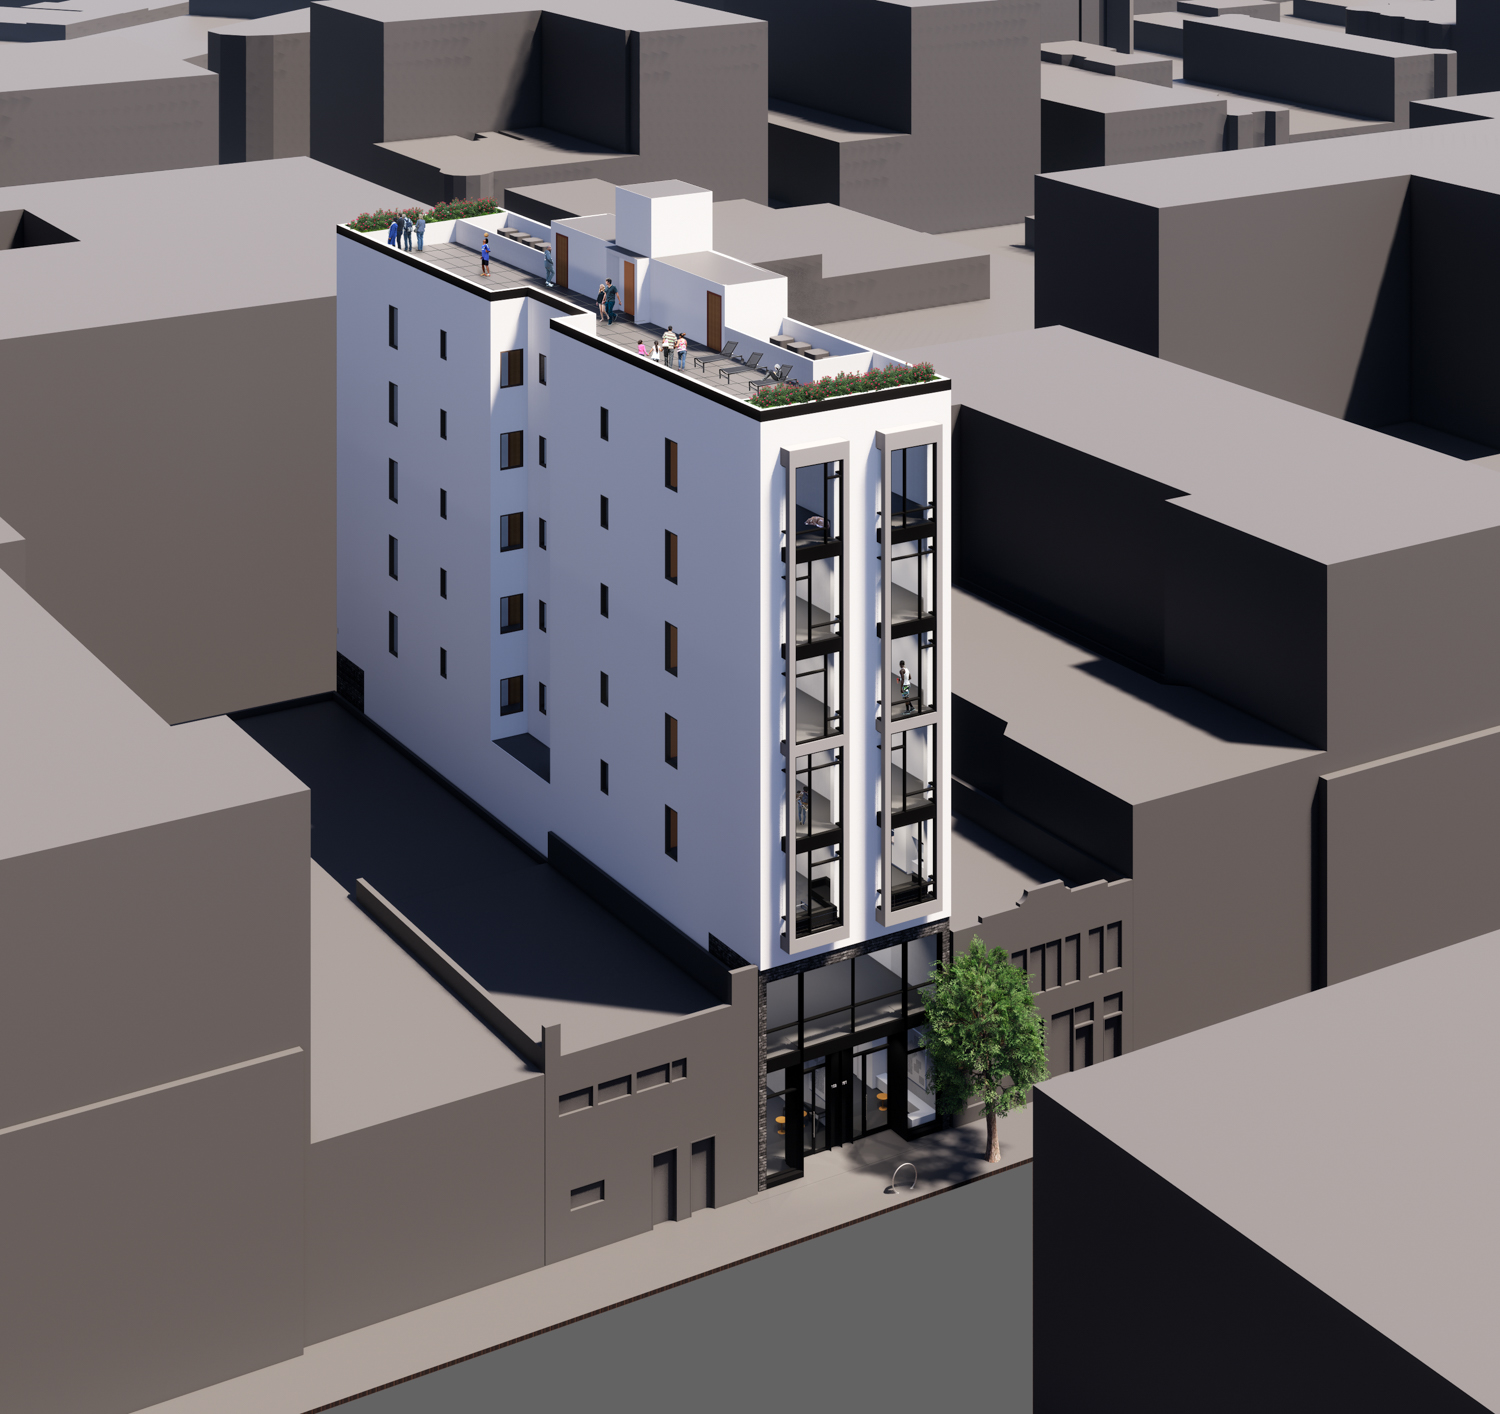 159 Fell Street aerial view, rendering by Winder Gibson Architects